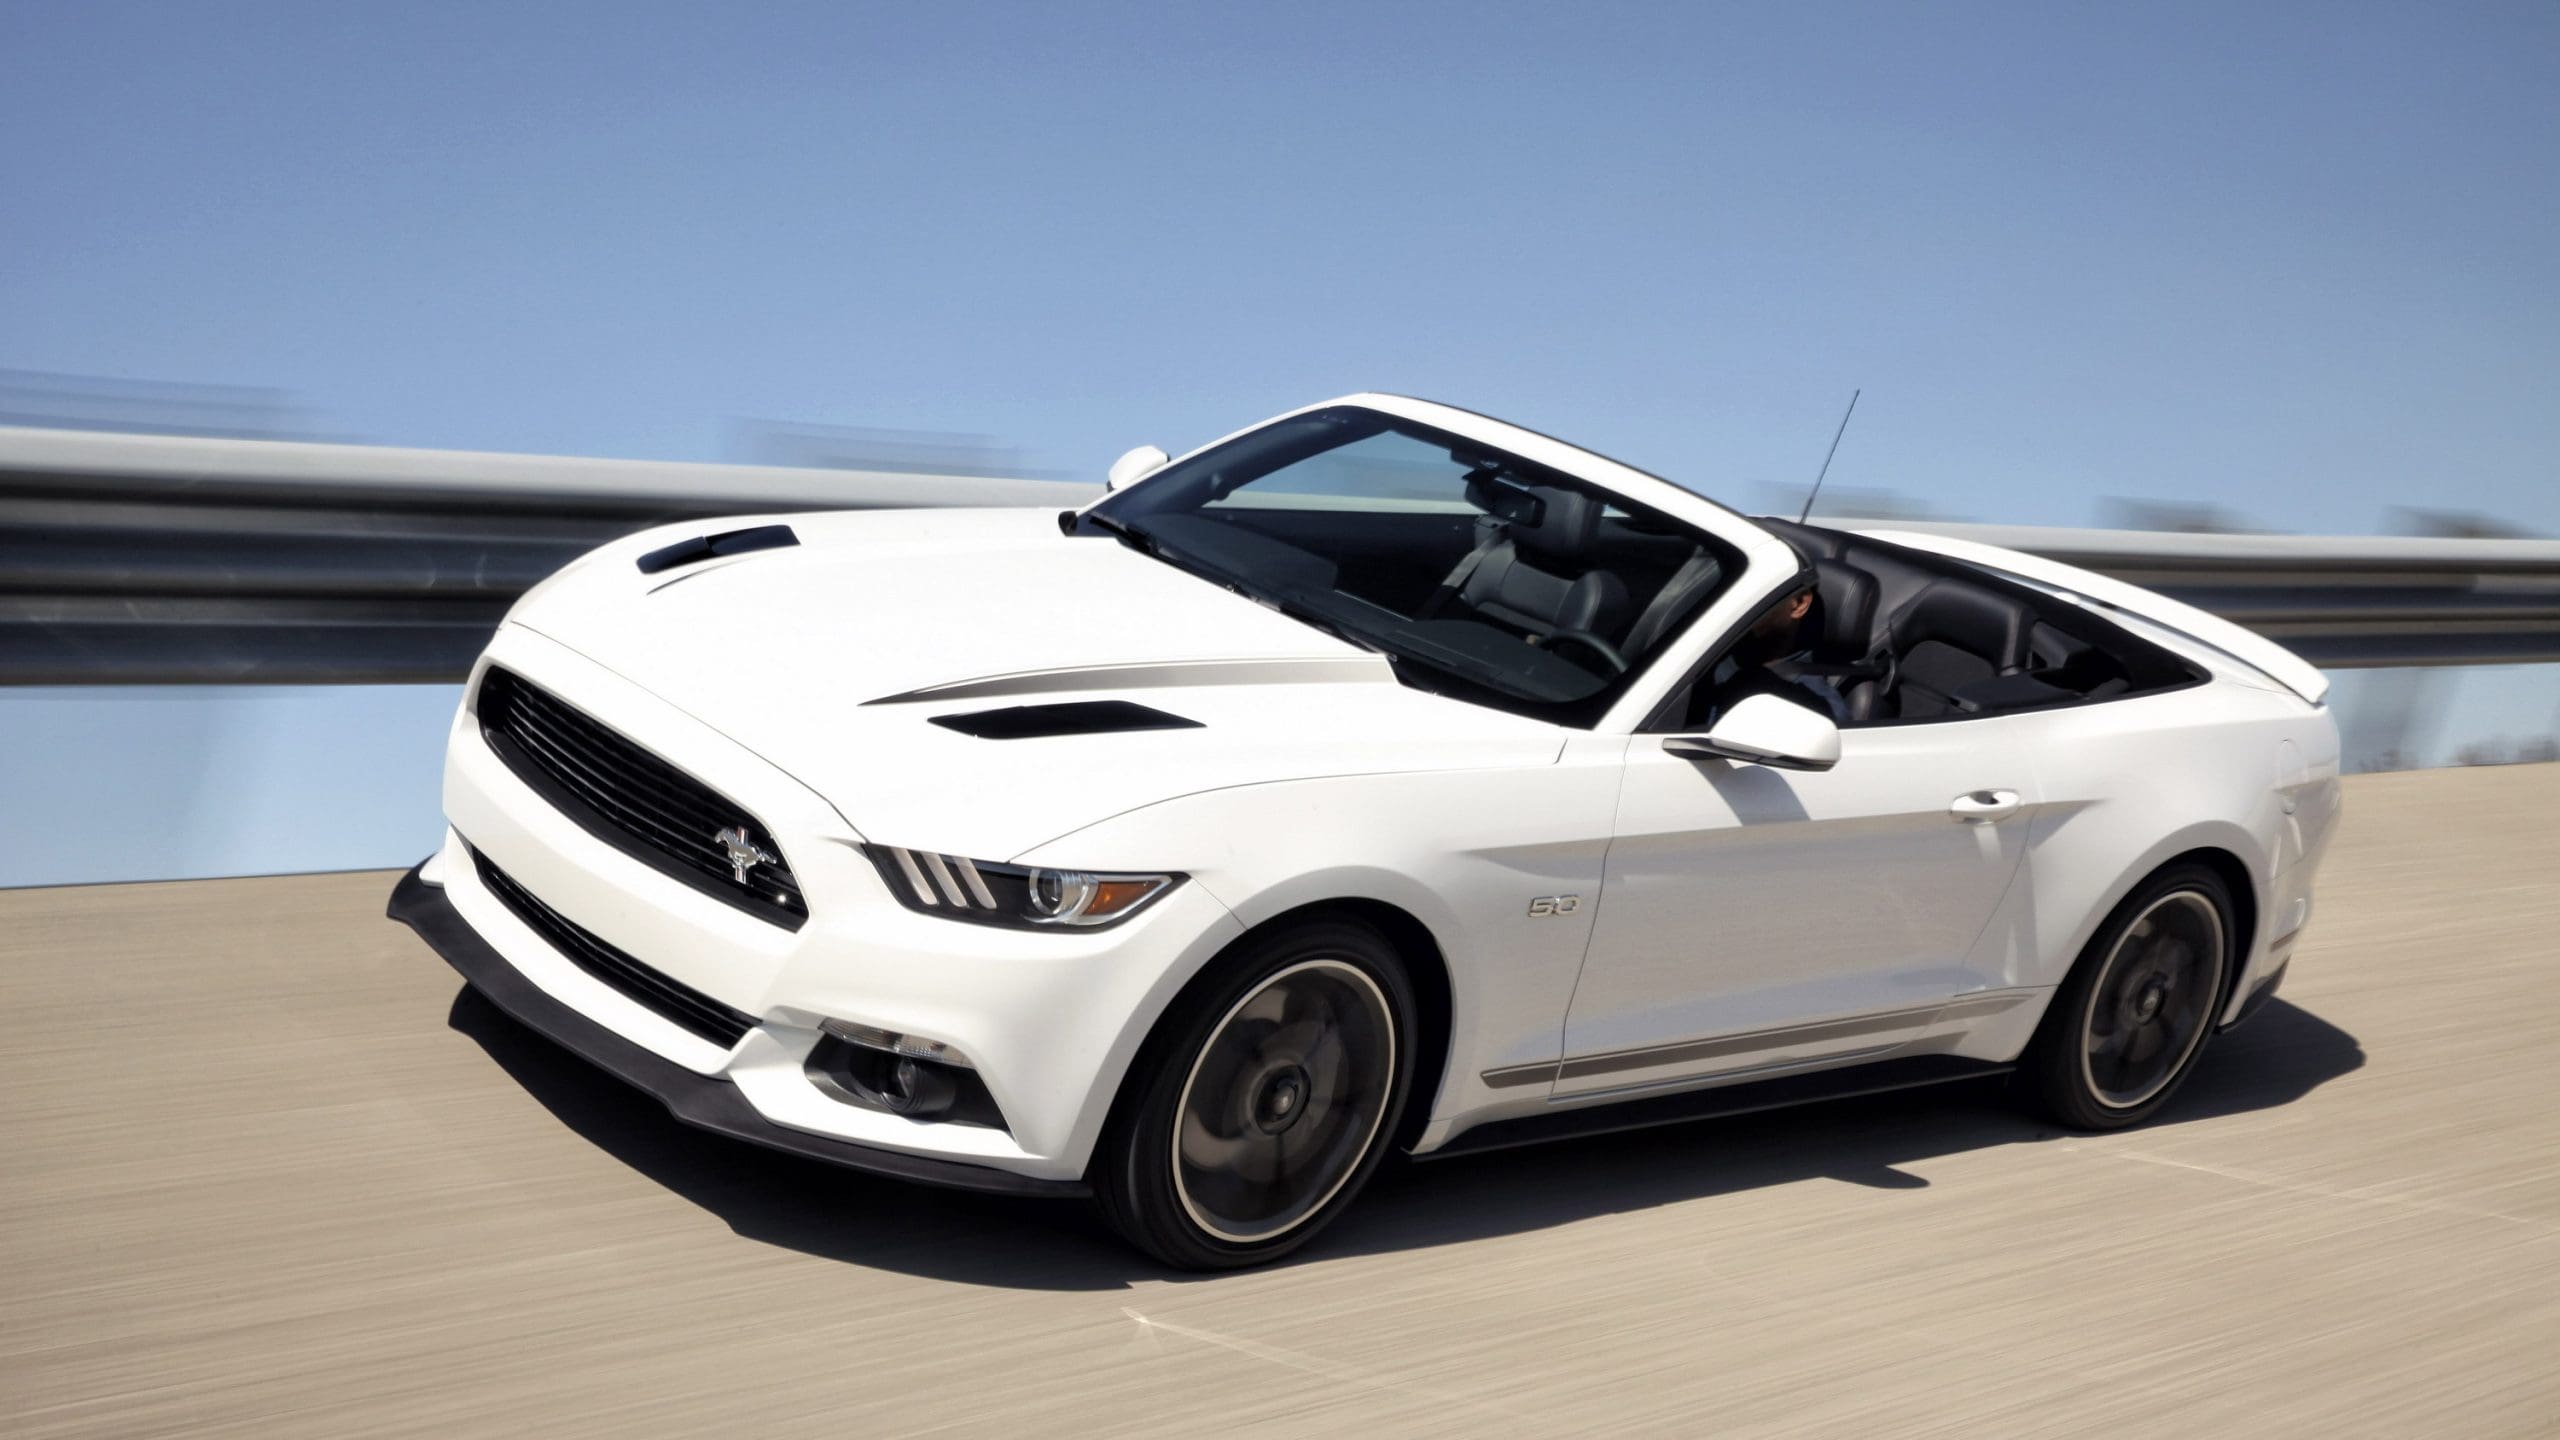 2016 Mustang Color Information